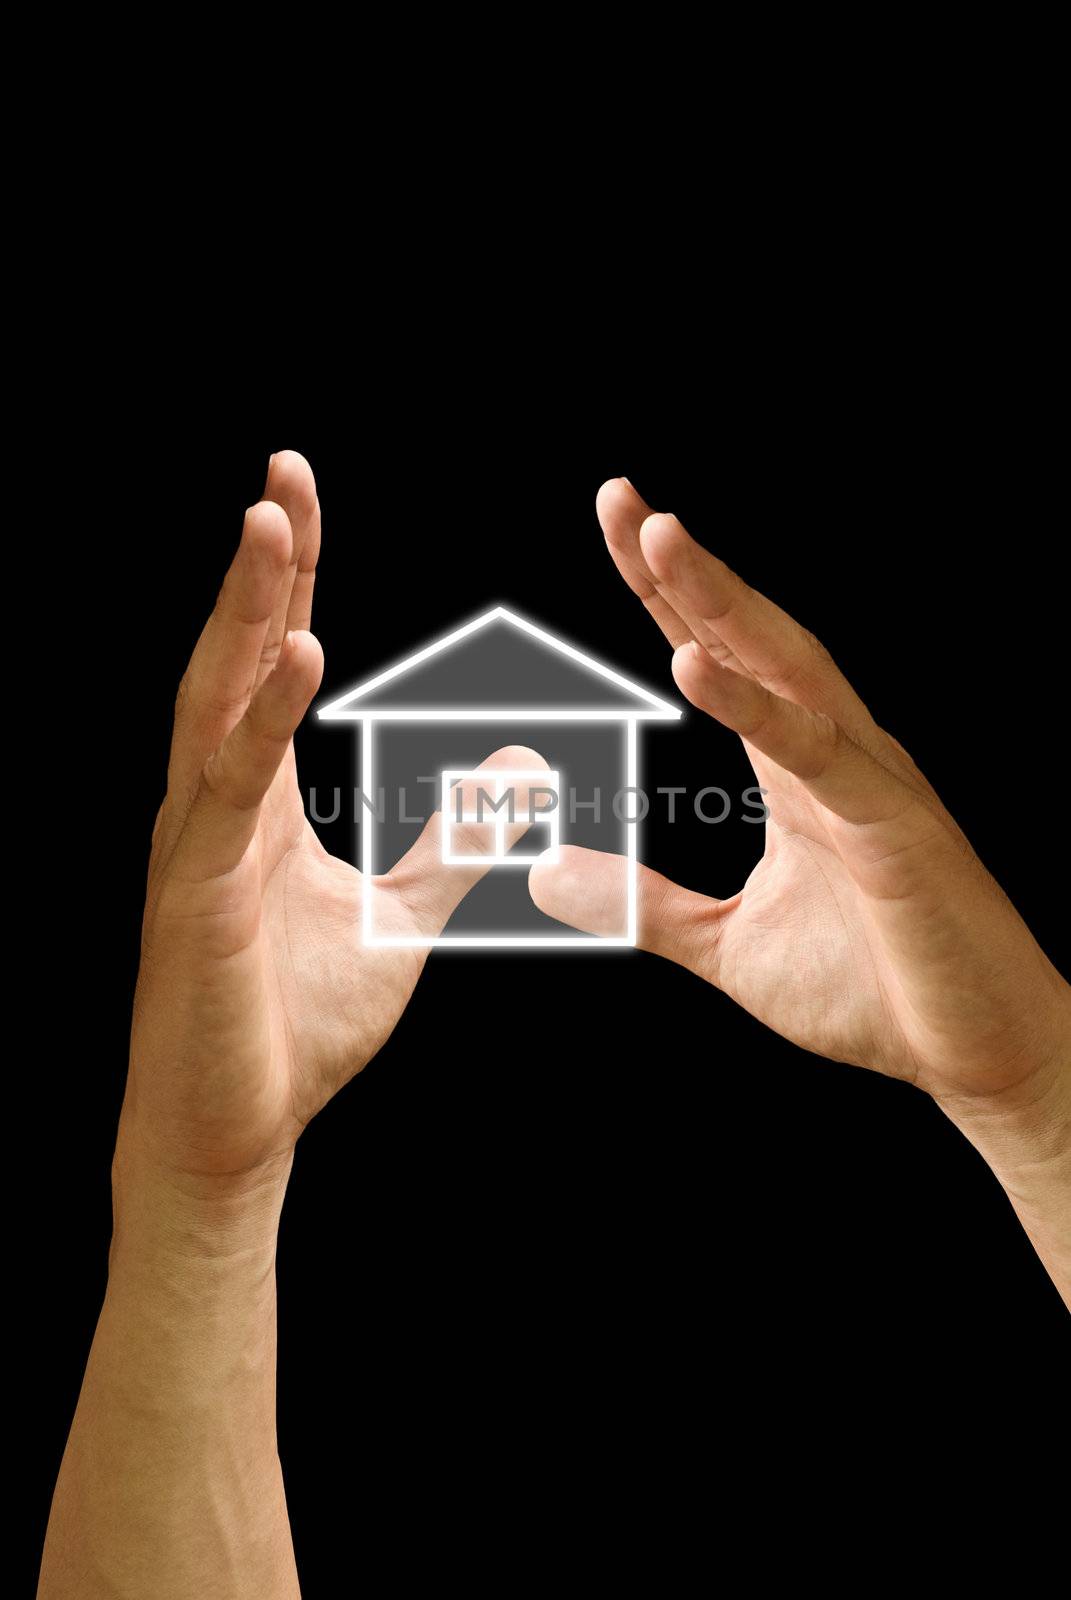 The hand hold the house icon on black background by pixbox77